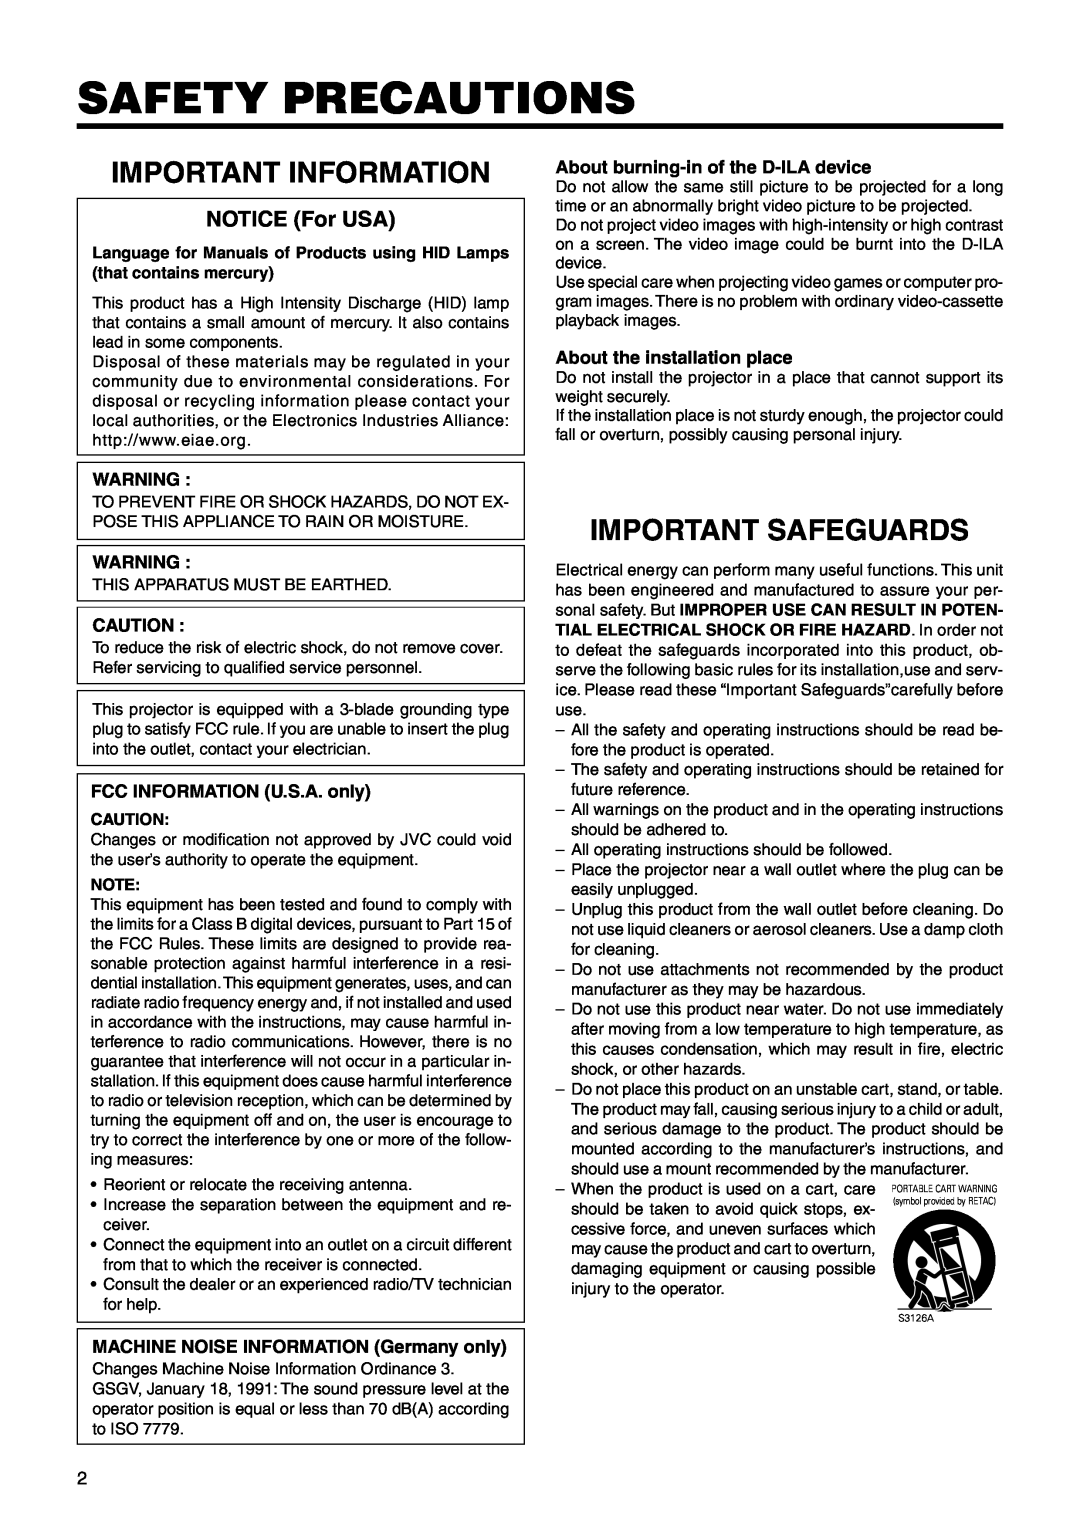 Dukane 28A9017 user manual Safety Precautions, Important Information, NOTICE For USA, FCC INFORMATION U.S.A. only 